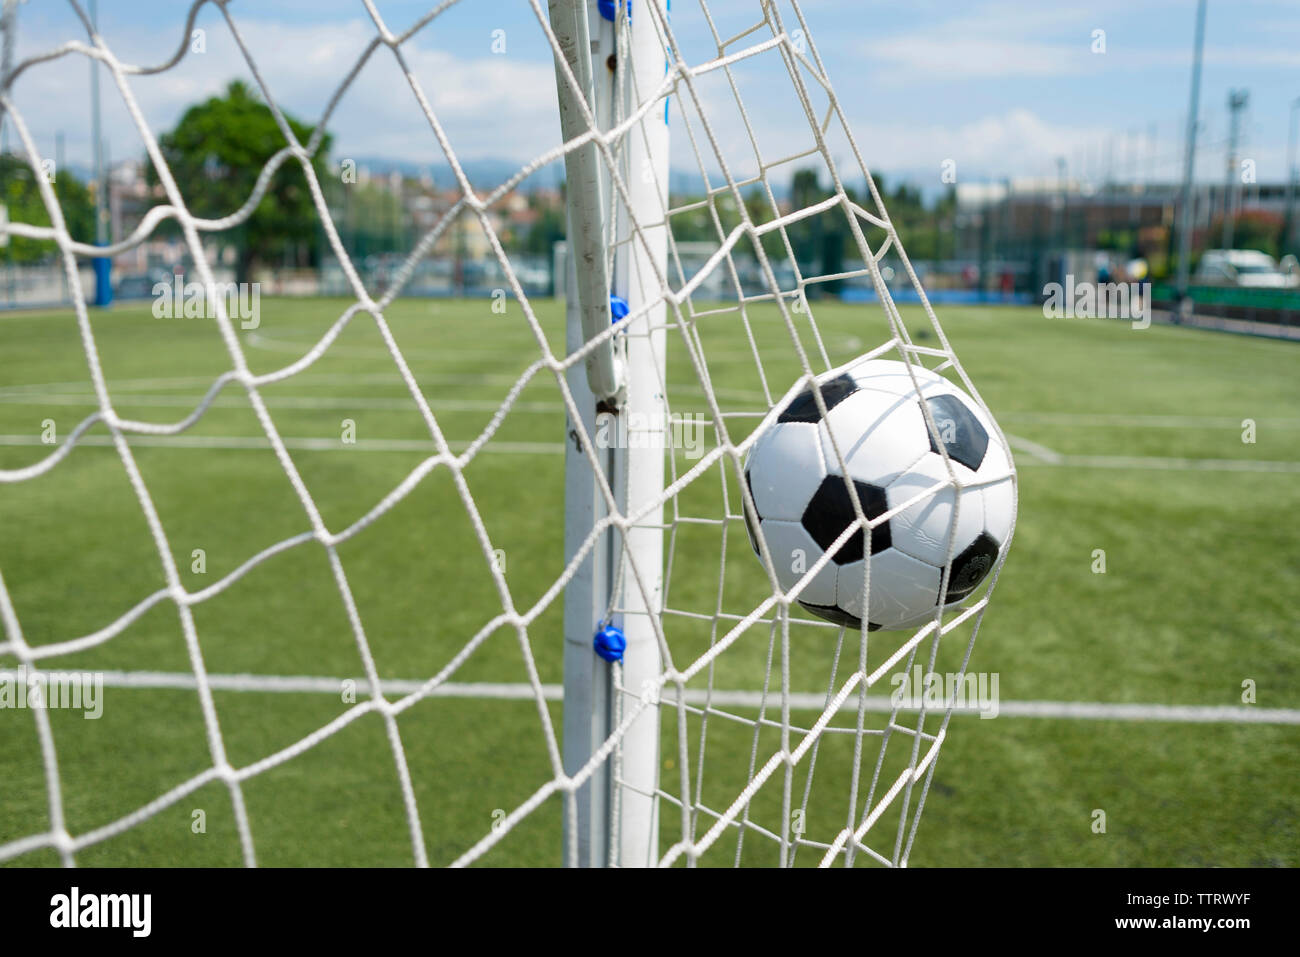 Soccer Ball Hitting Goal Net High Resolution Stock Photography And Images Alamy